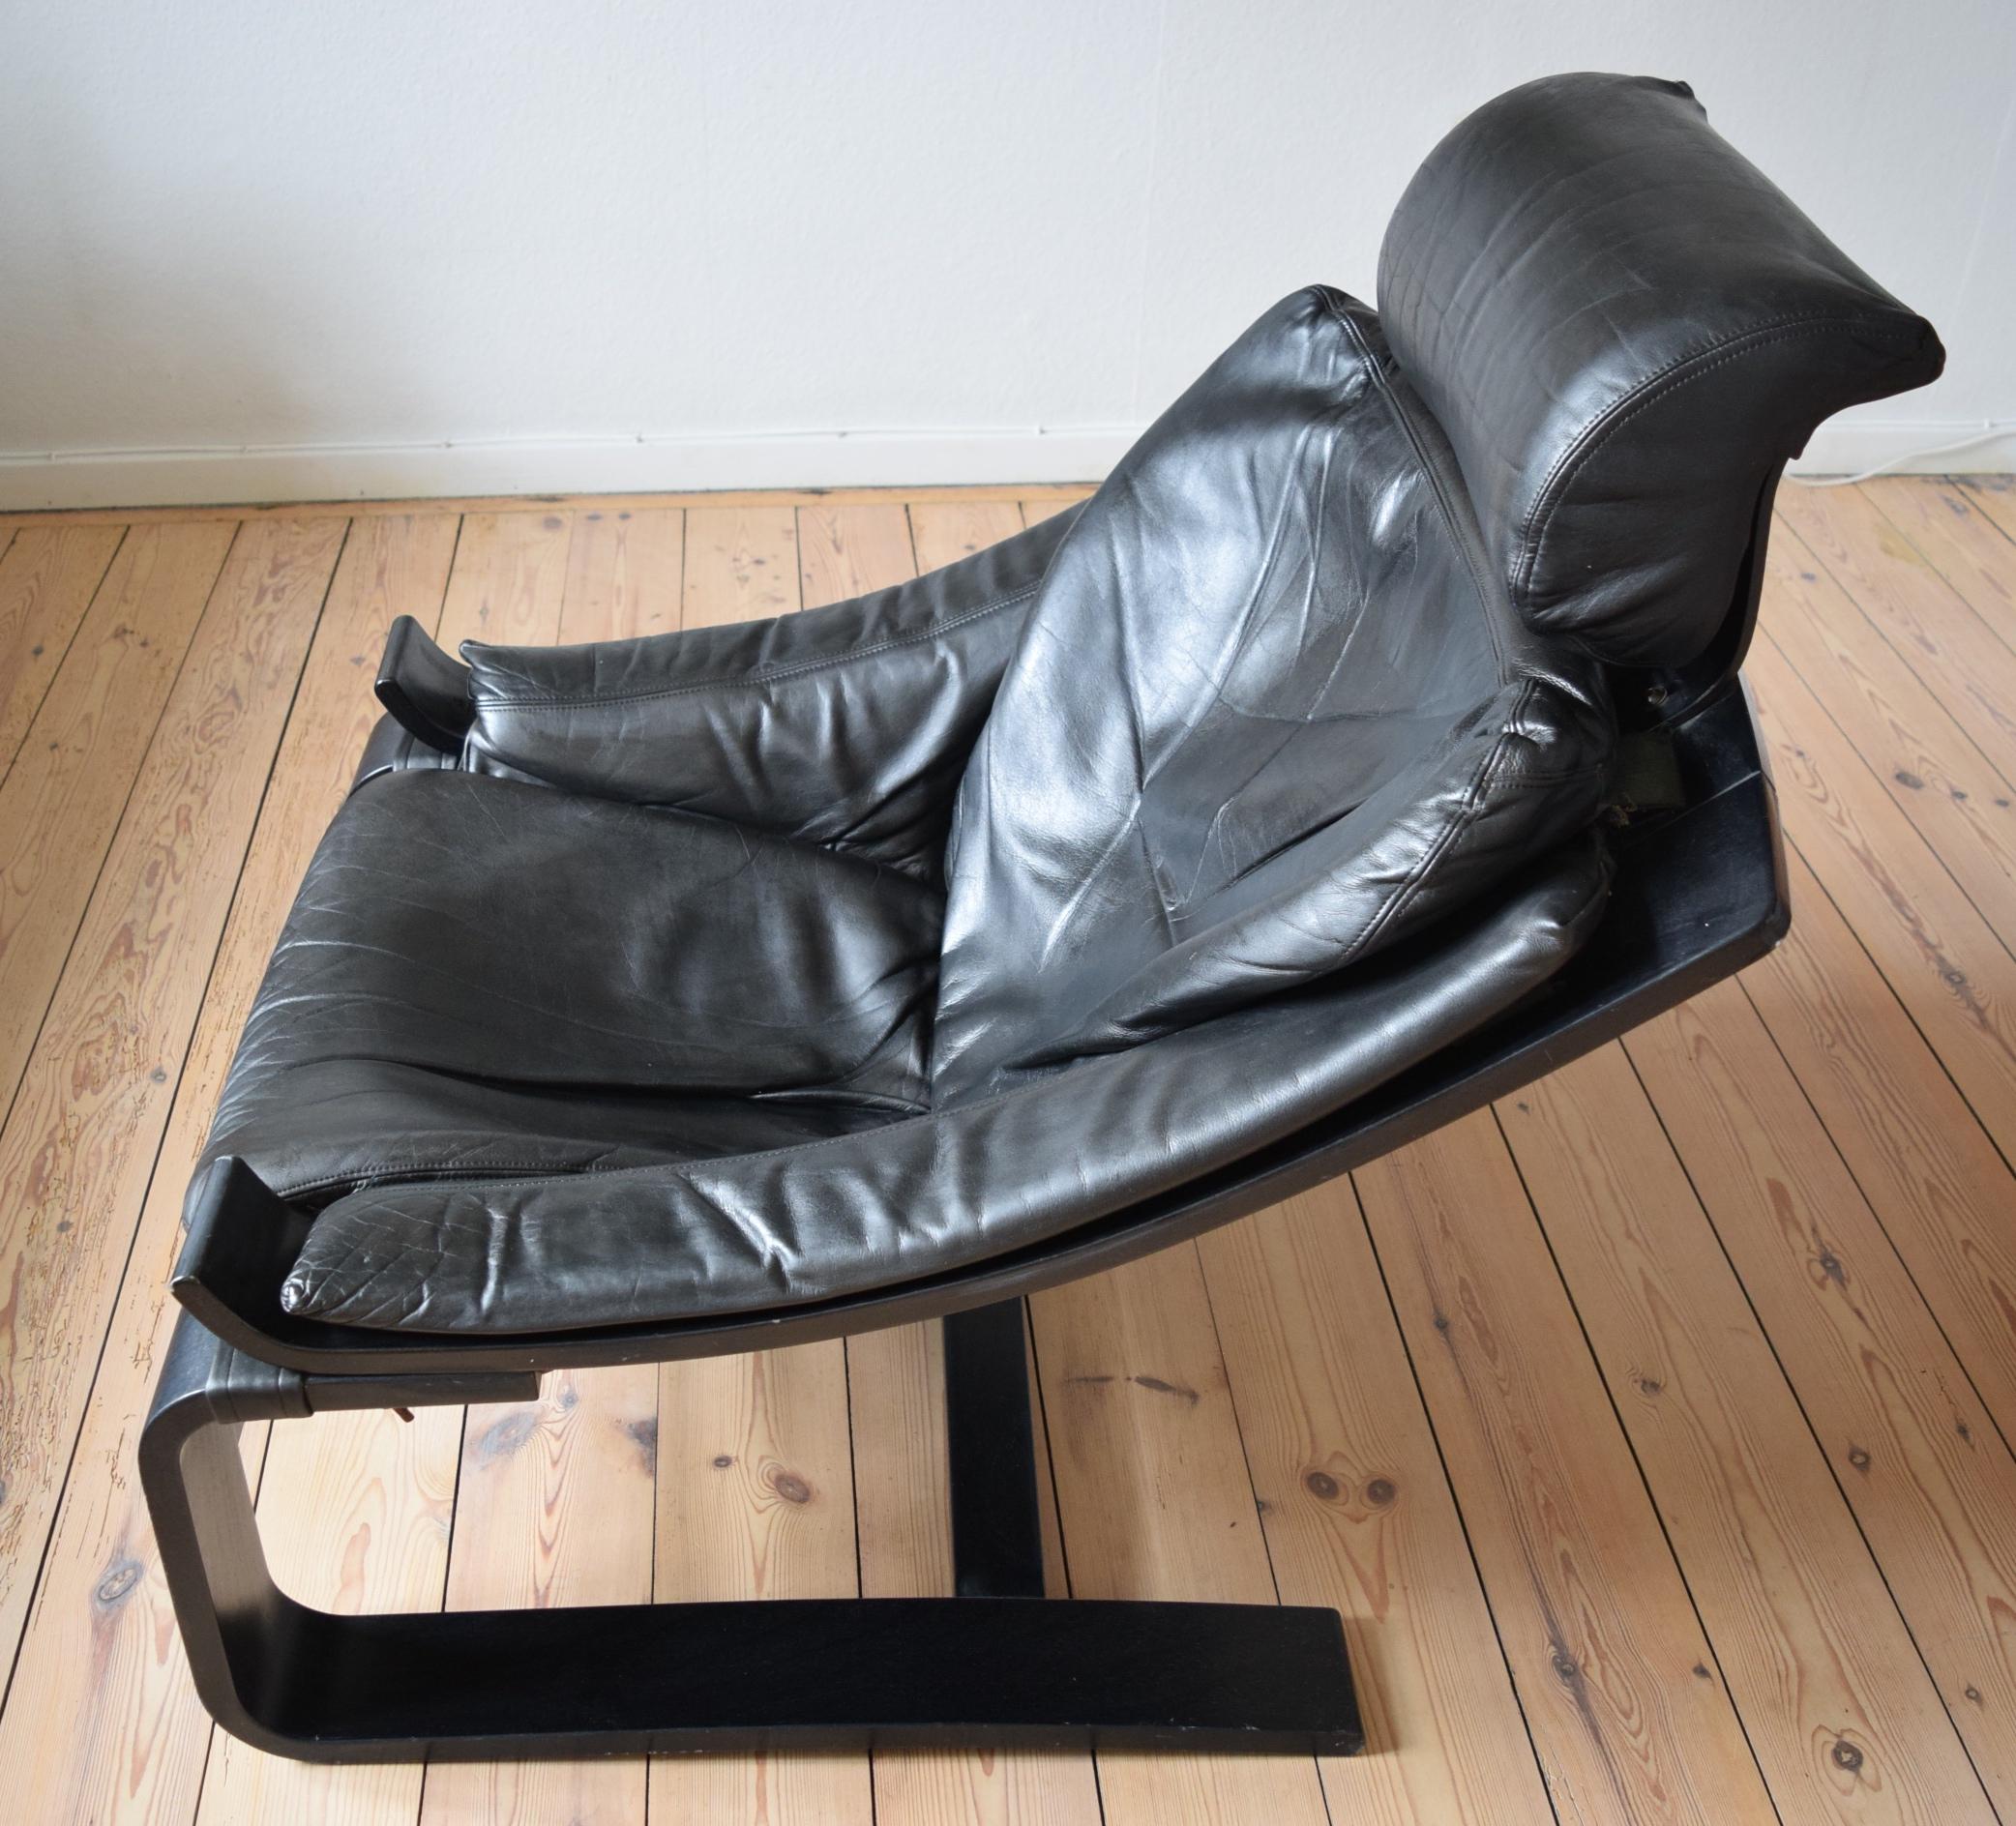 Midcentury Swedish Leather Kroken Chairs by Ake Fribytter for Nelo, 1974 For Sale 4